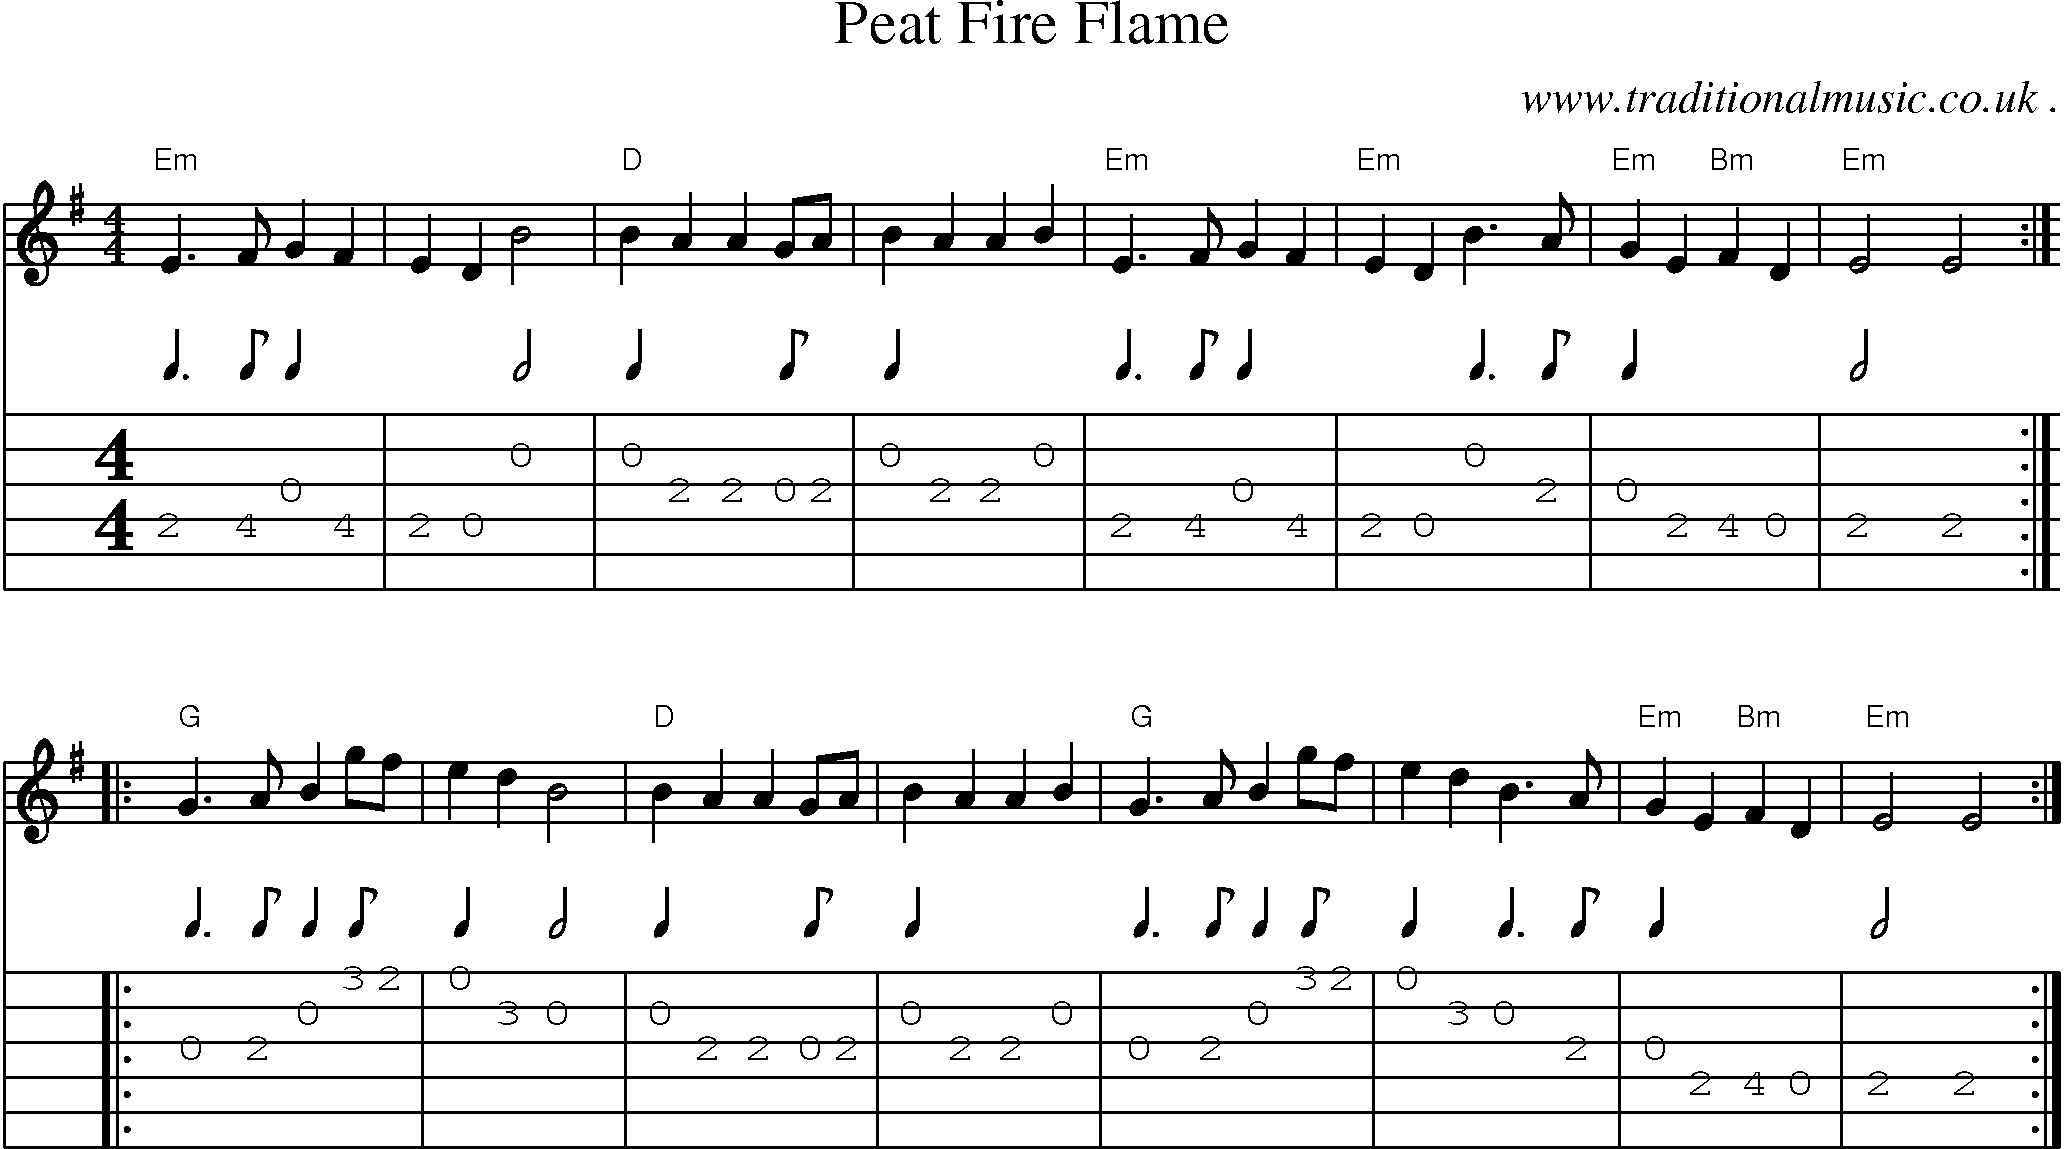 Sheet-Music and Guitar Tabs for Peat Fire Flame